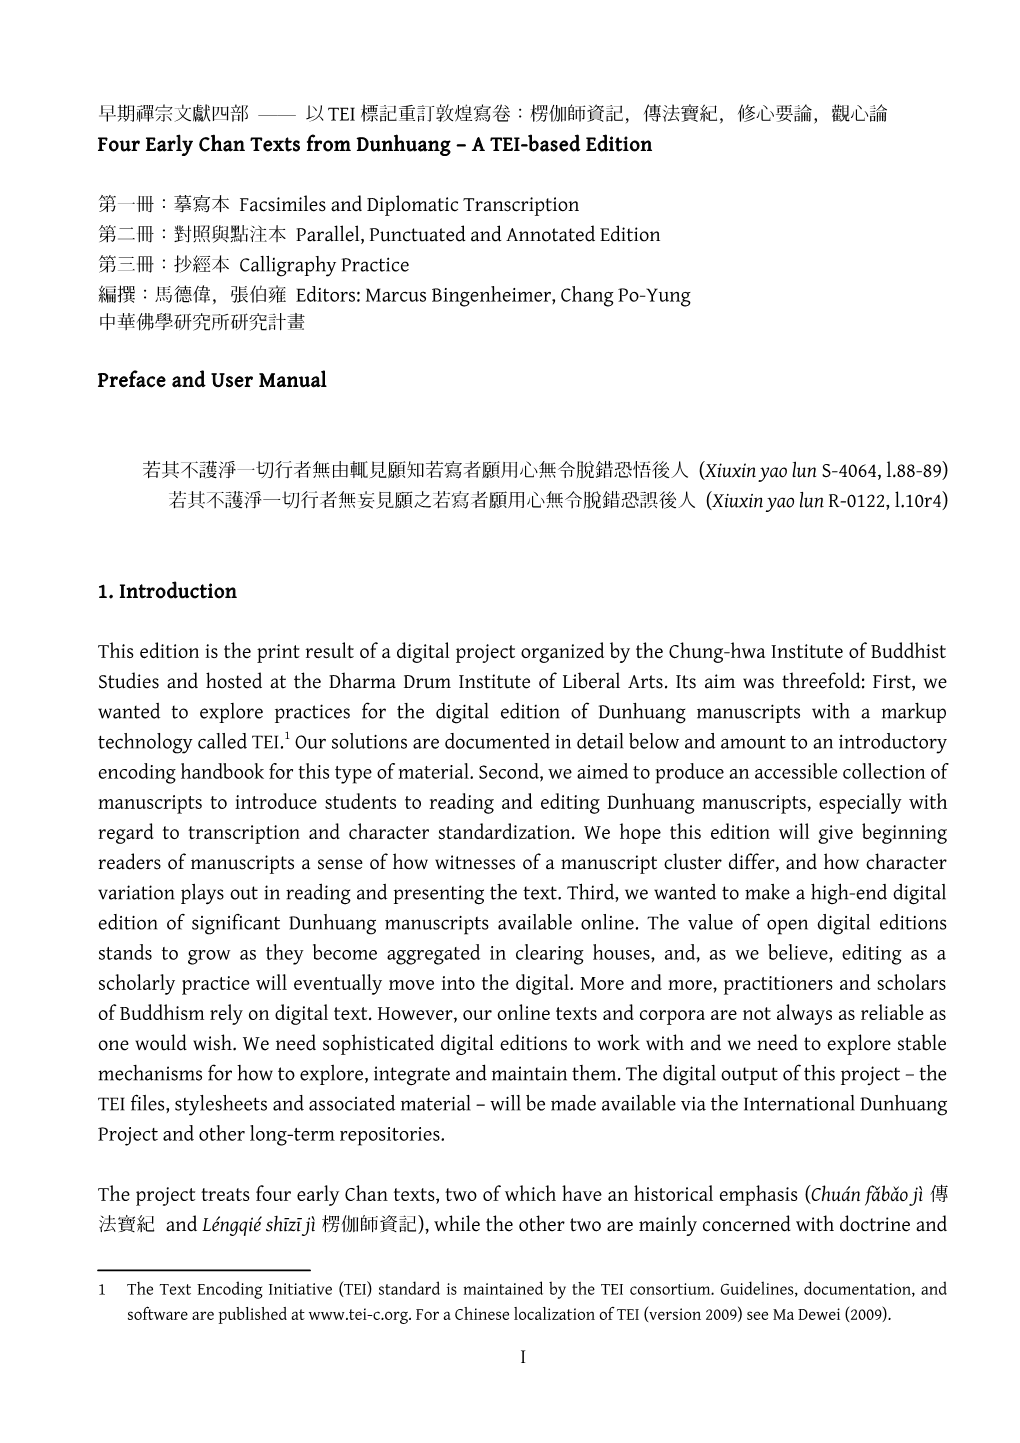 Four Early Chan Texts from Dunhuang – a TEI-Based Edition